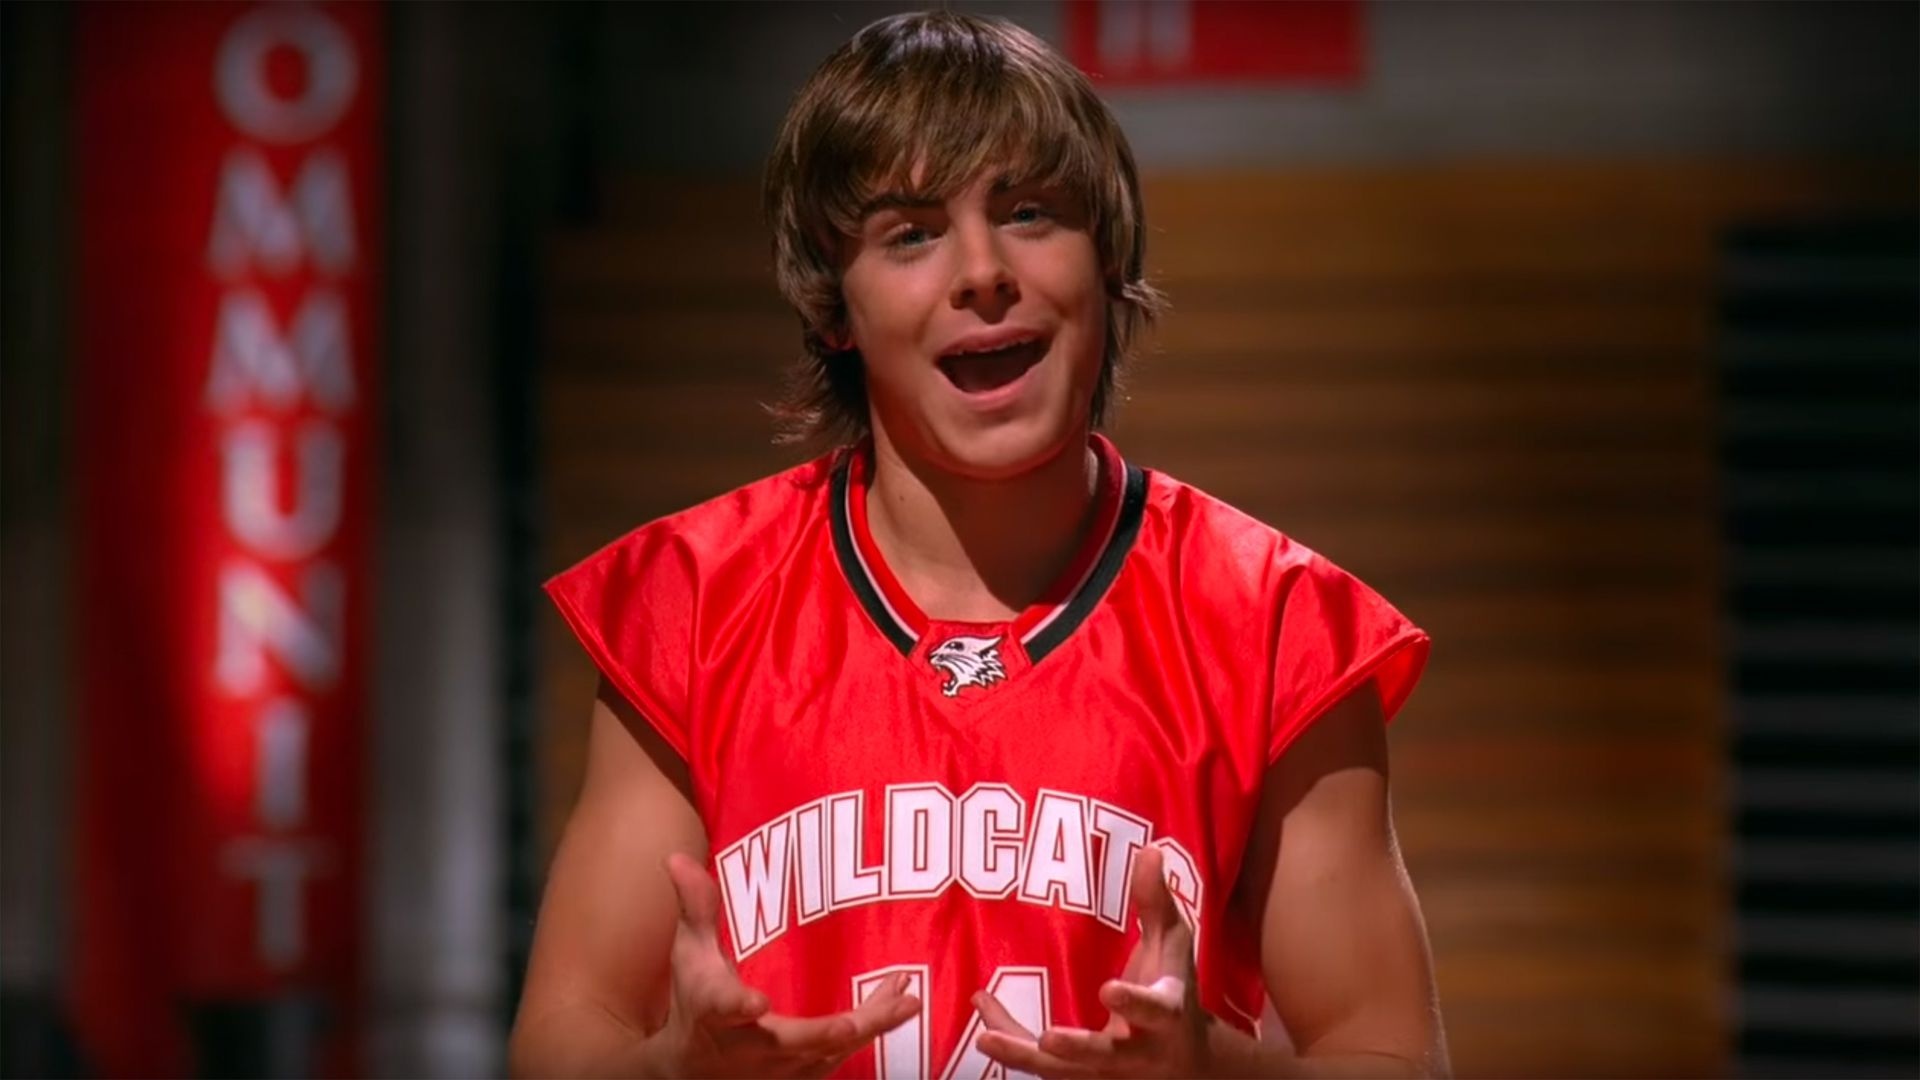 High School Musical Wallpapers (49+ images inside)